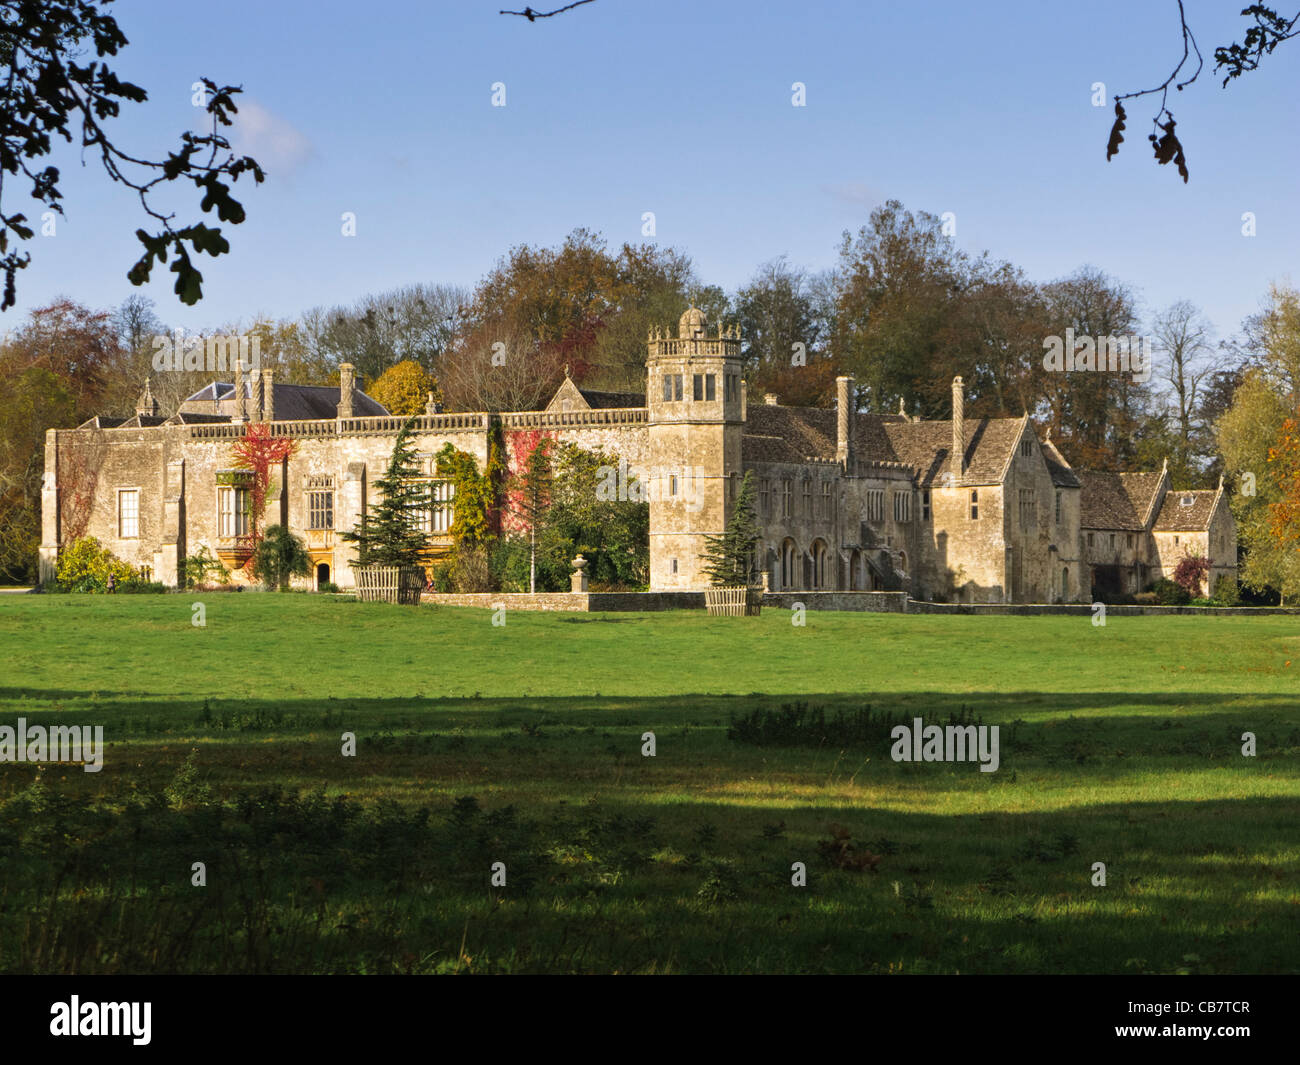 Lacock Abbey, historic stately home house in Lacock, Wiltshire, England, UK Stock Photo